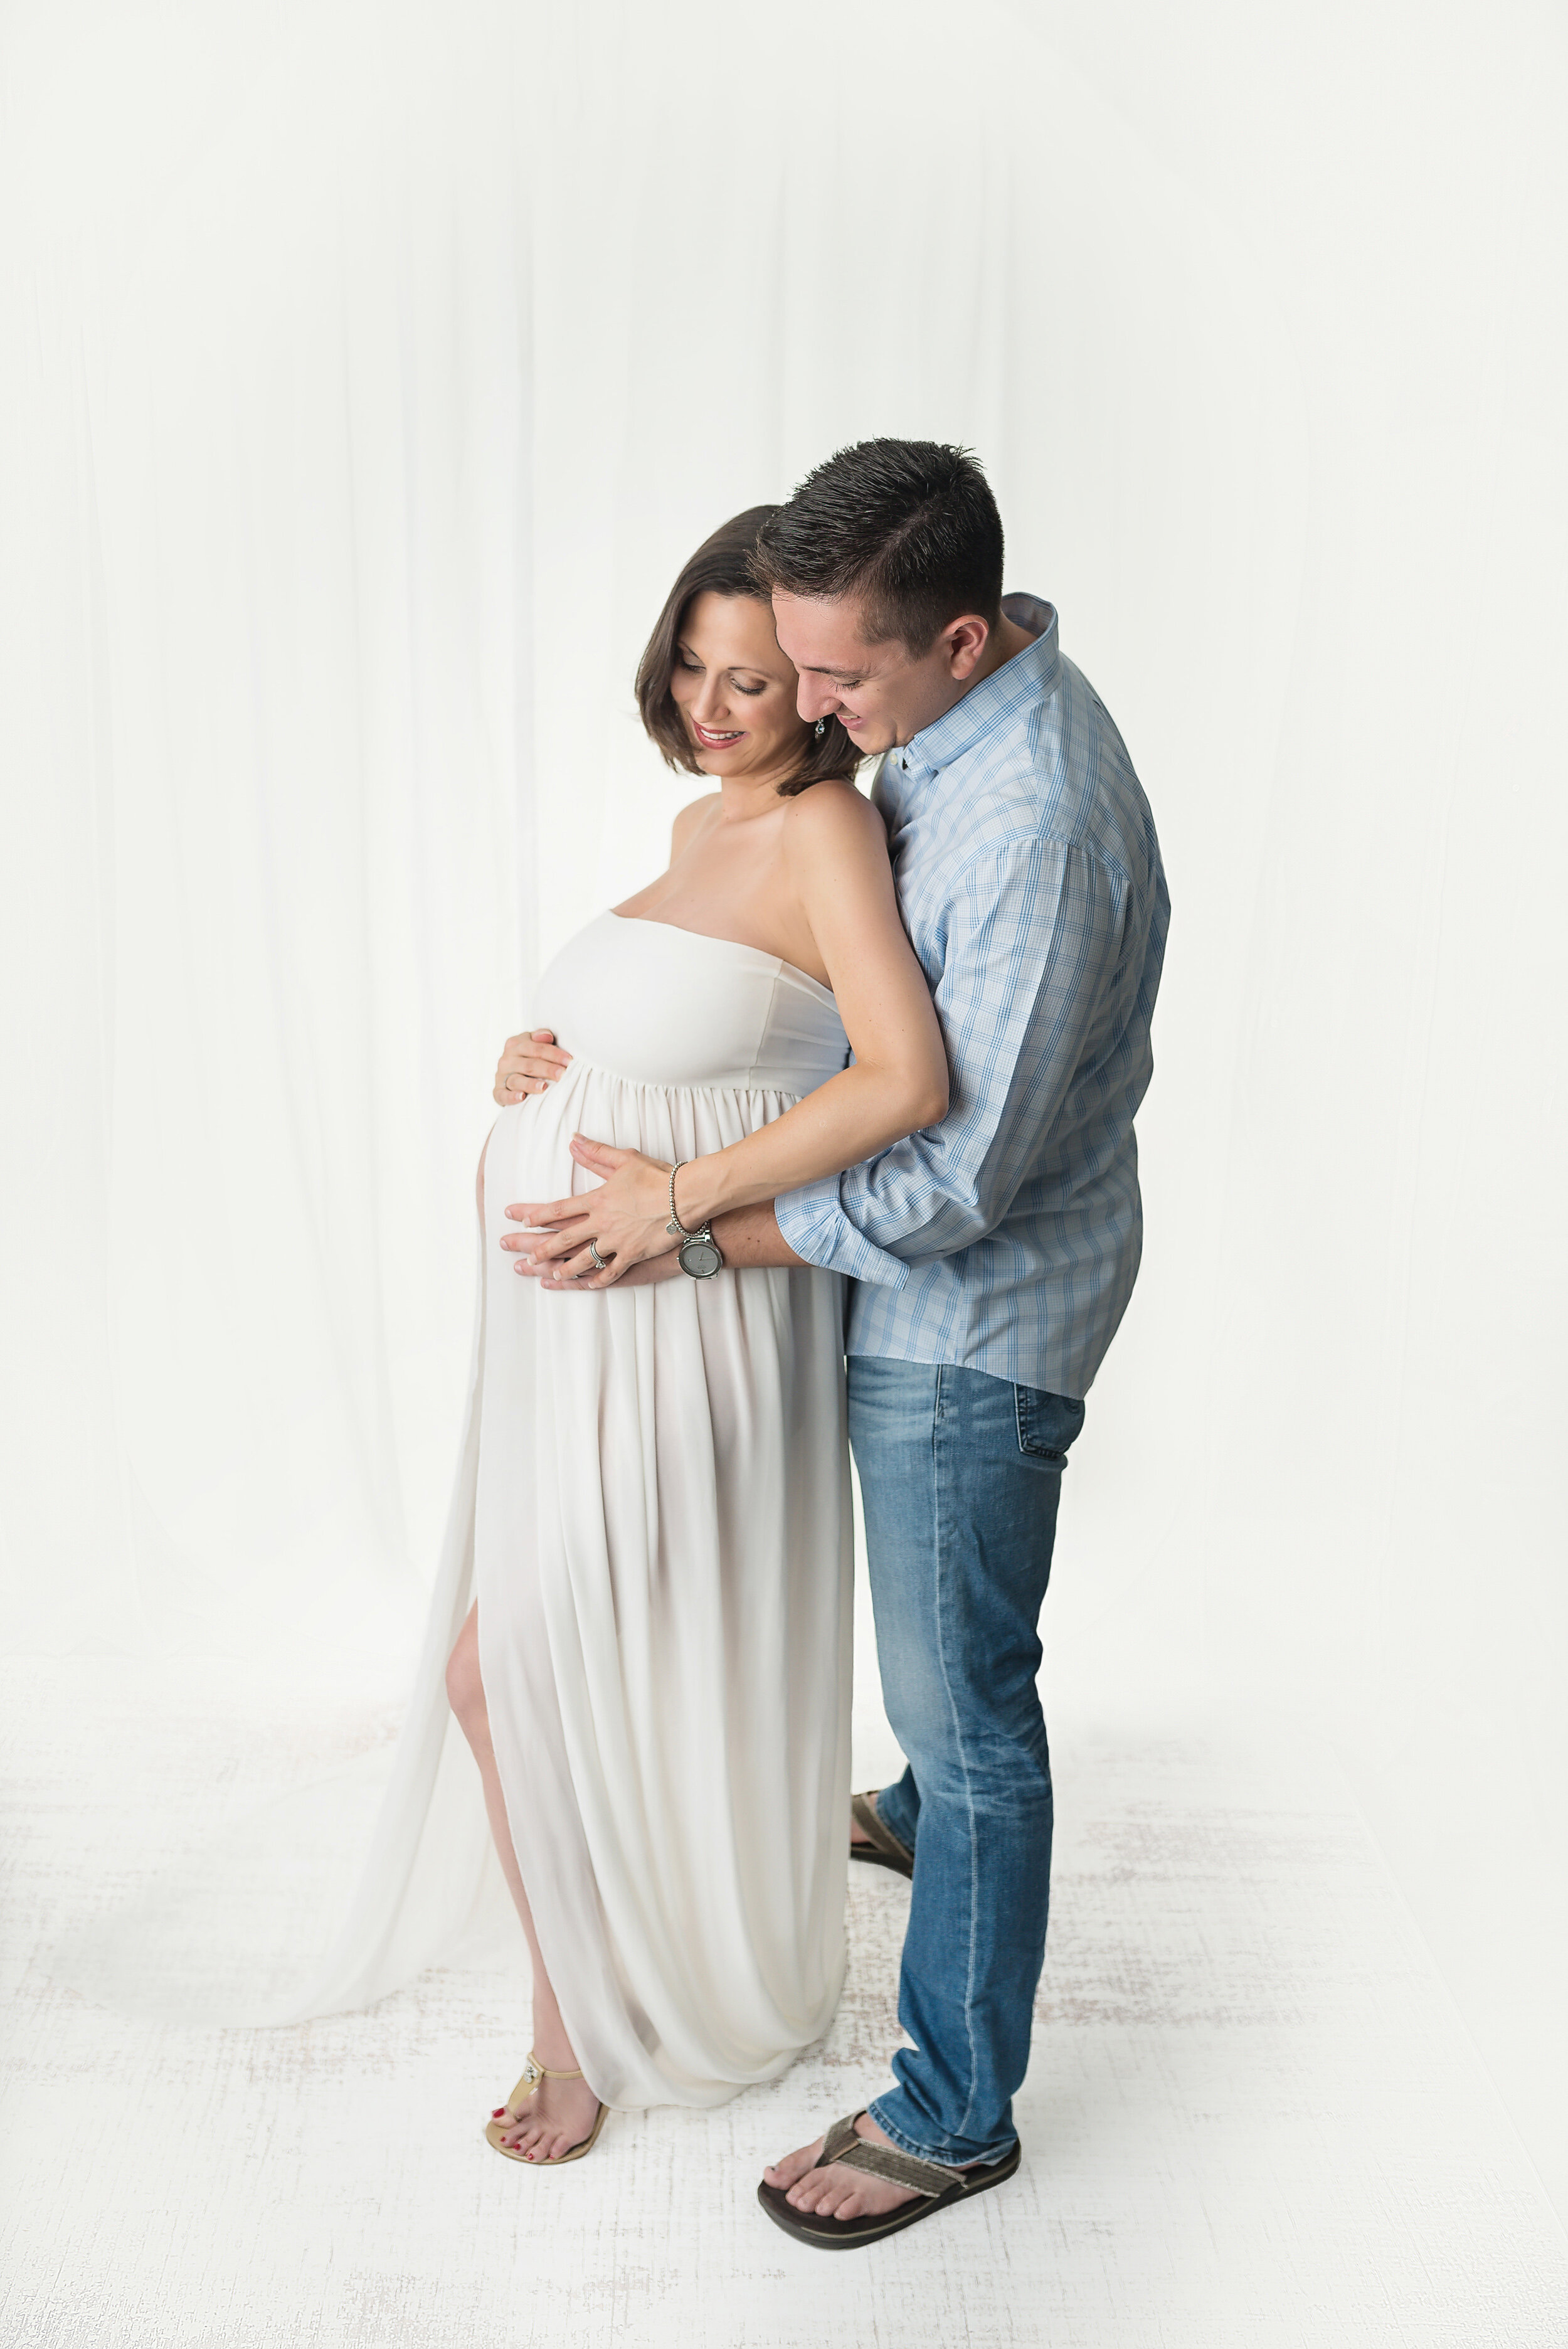 maternity-south-florida-maternity-photographer-west-palm-beach-boca-raton-captured-moments-by-dawn-photography-023.jpg